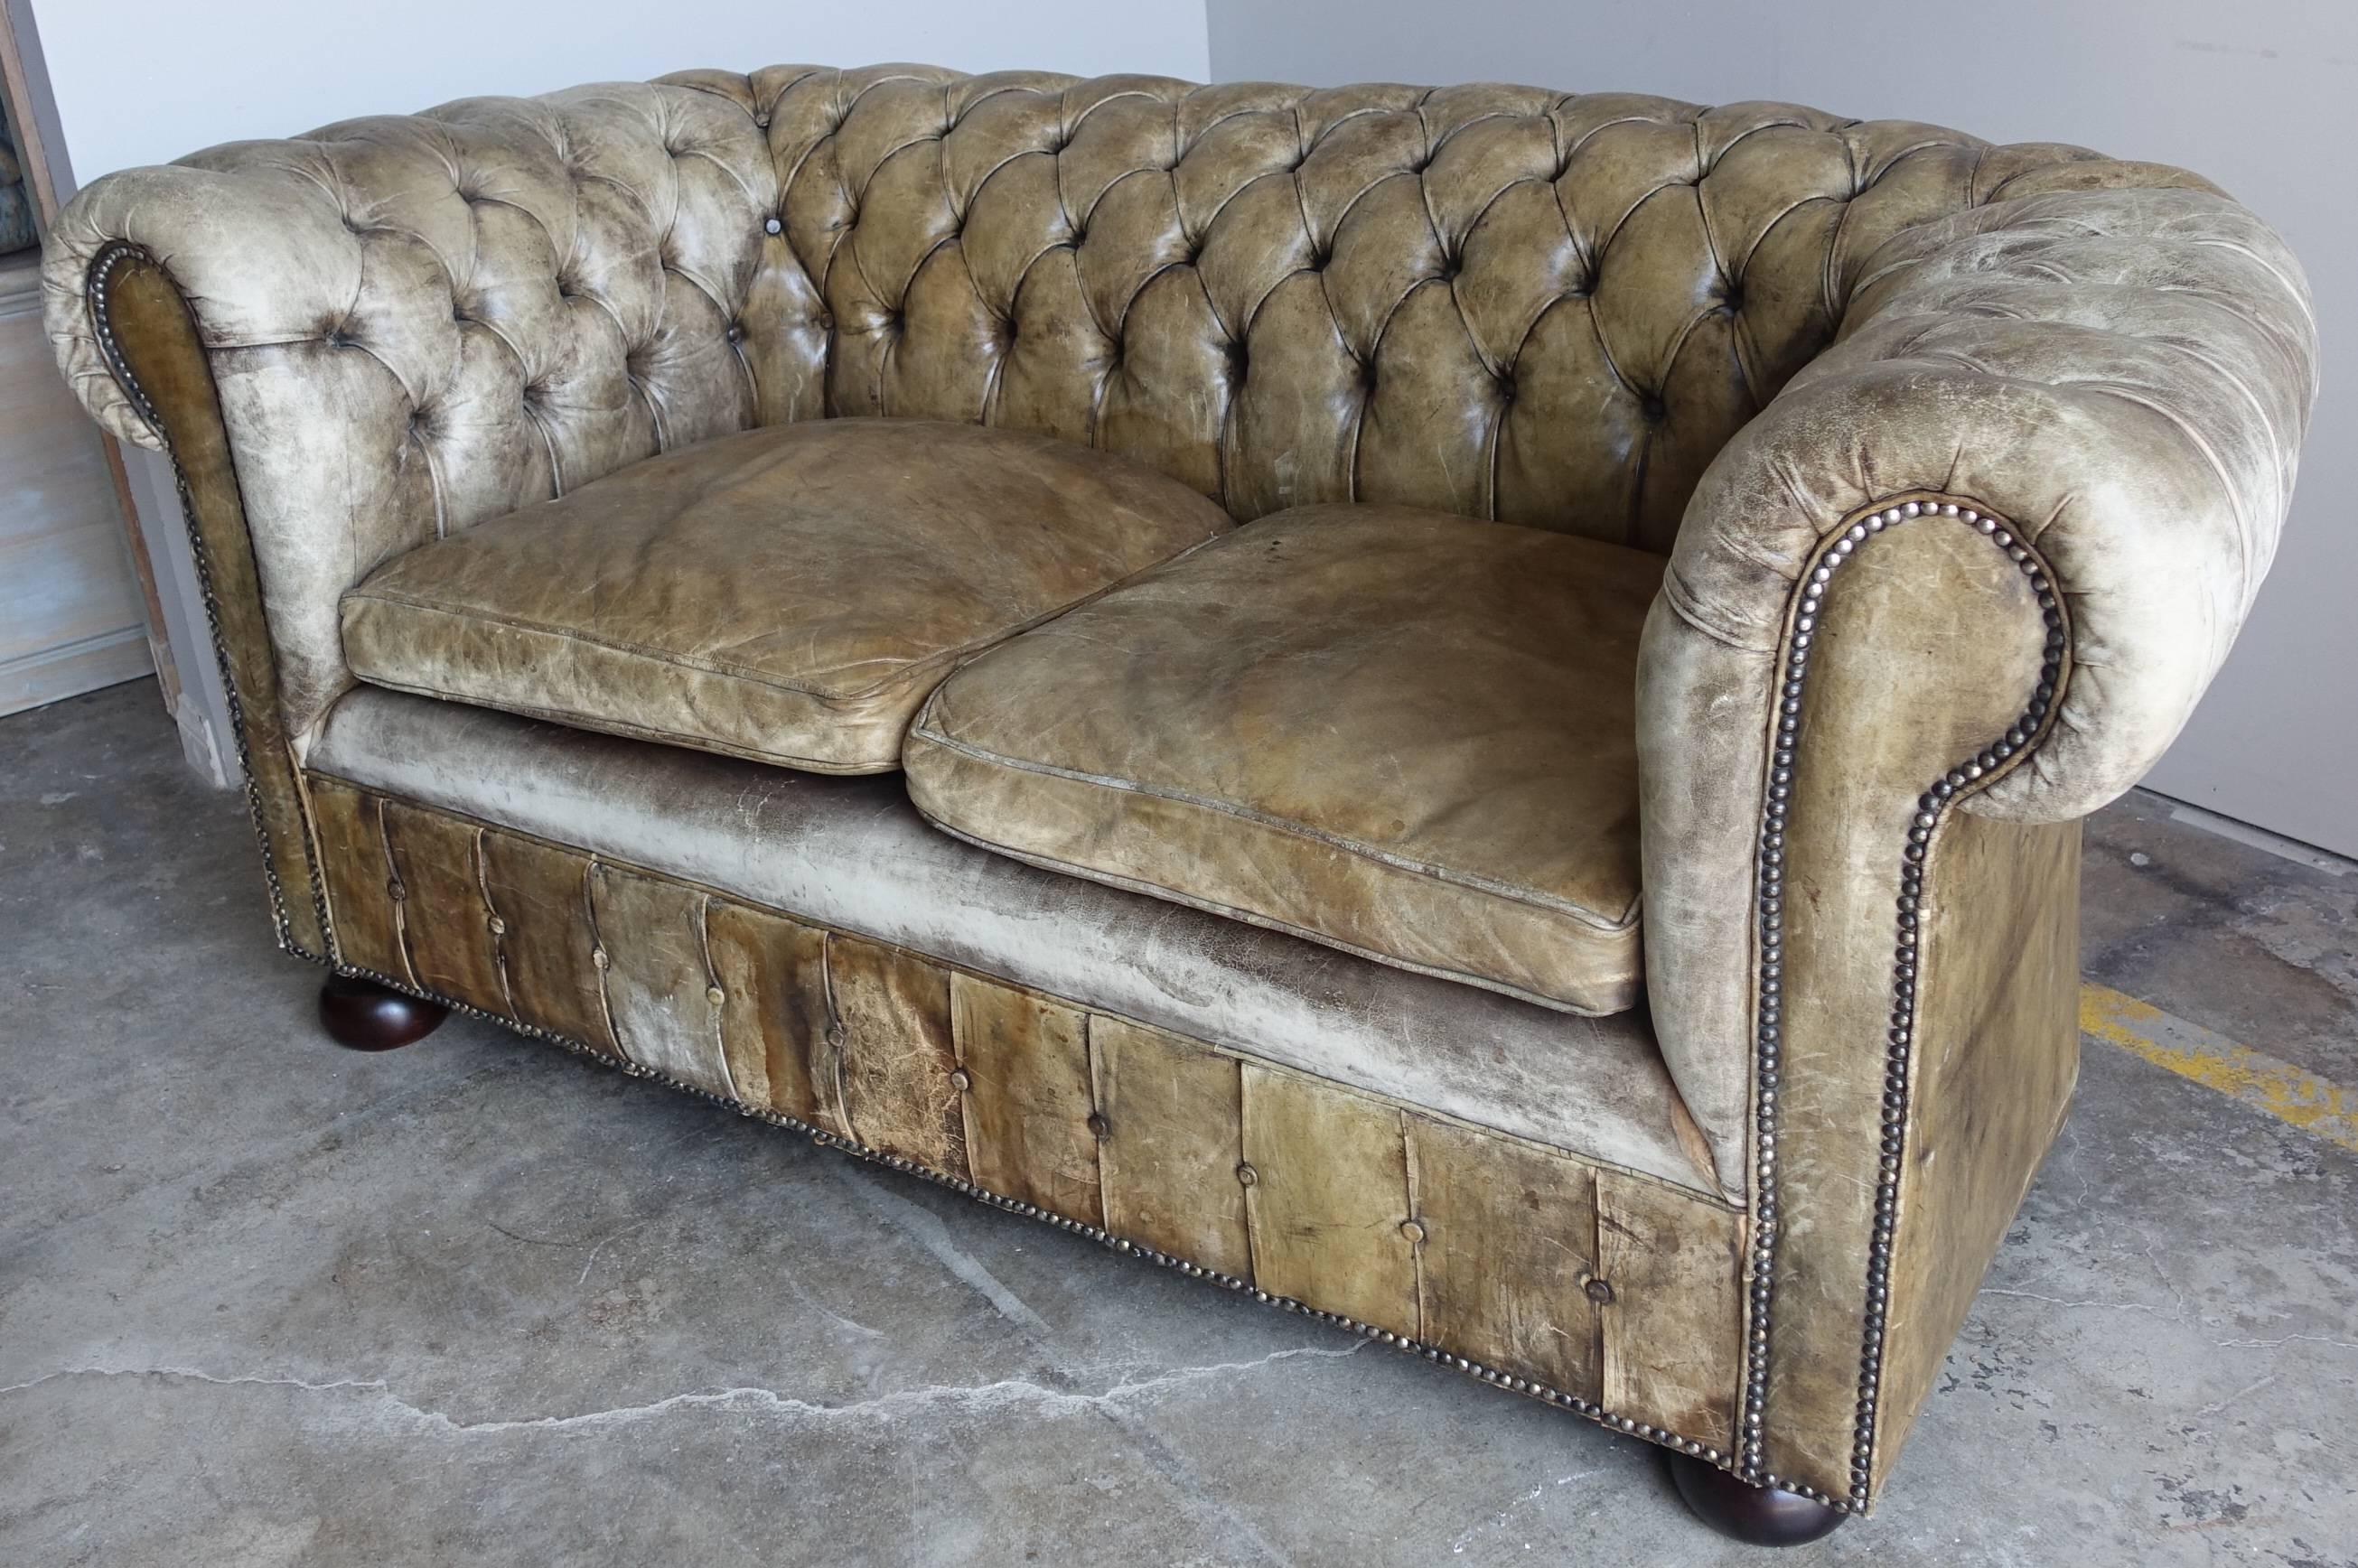 English wonderfully worn leather tufted Chesterfield sofa standing on bun feet with nailhead trim detail. Two loose seat cushions.